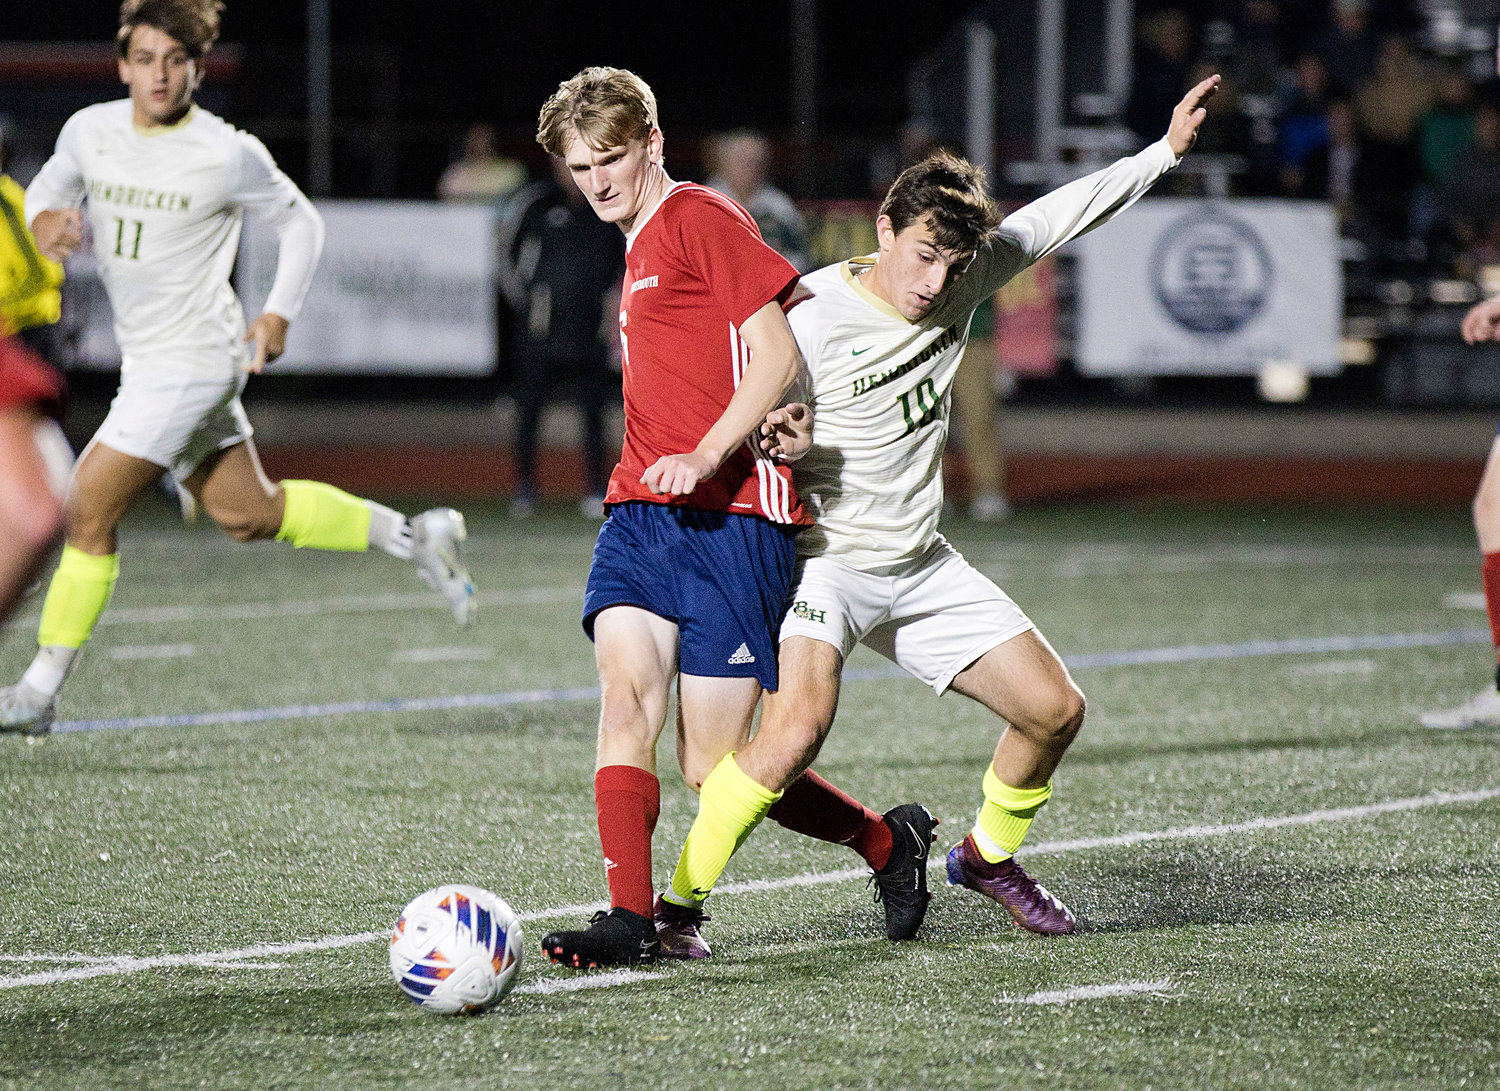 Owen Francis steps into a pass under the pressure of a Hendricken opponent.